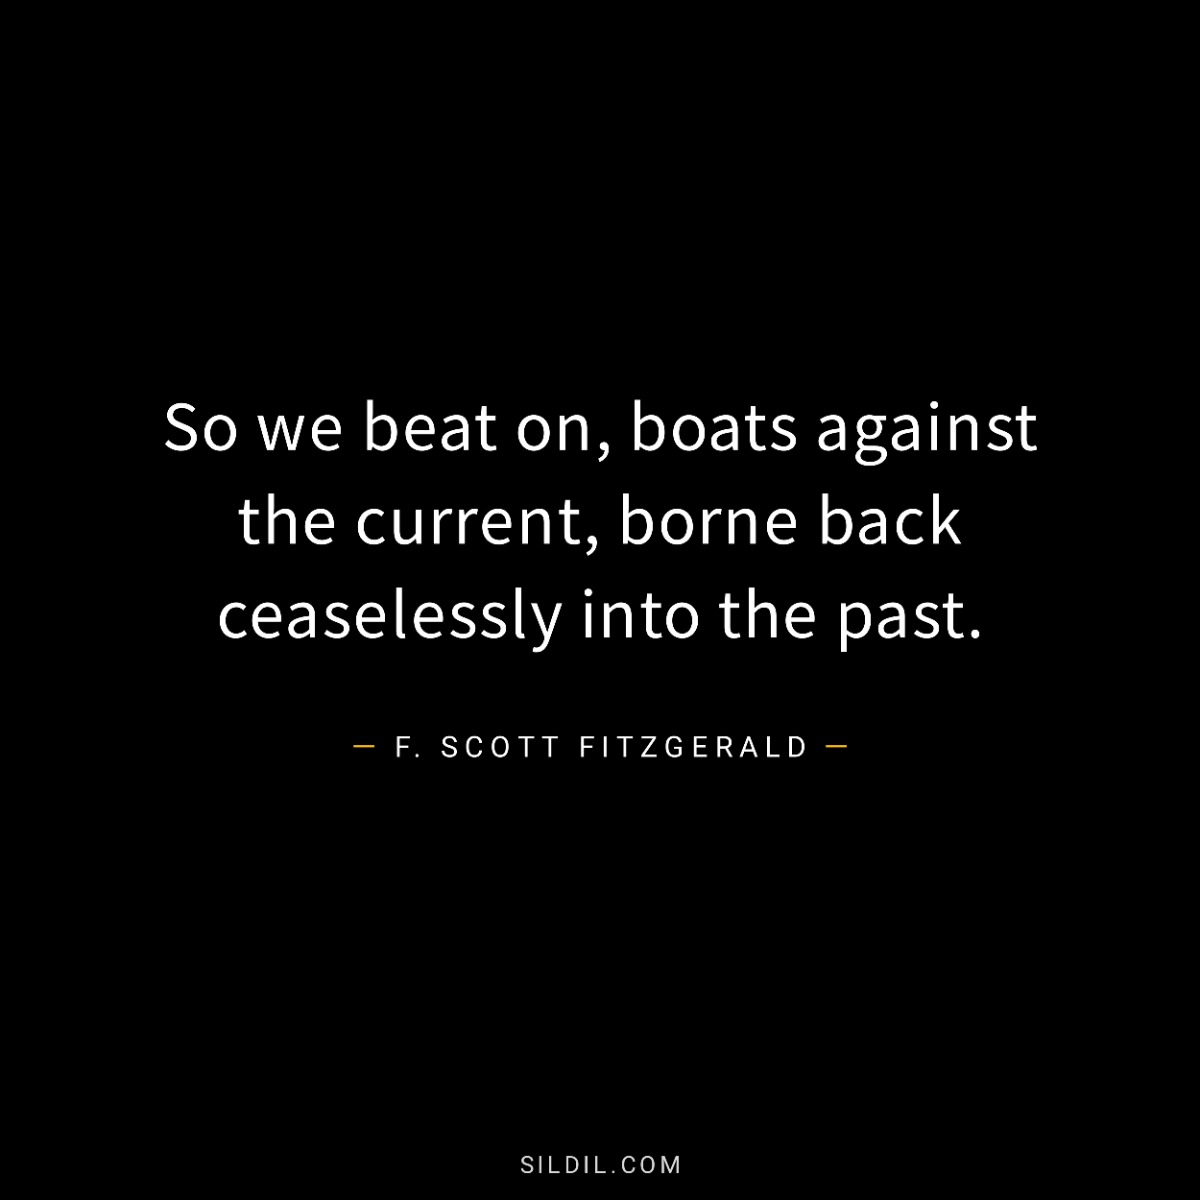 So we beat on, boats against the current, borne back ceaselessly into the past.